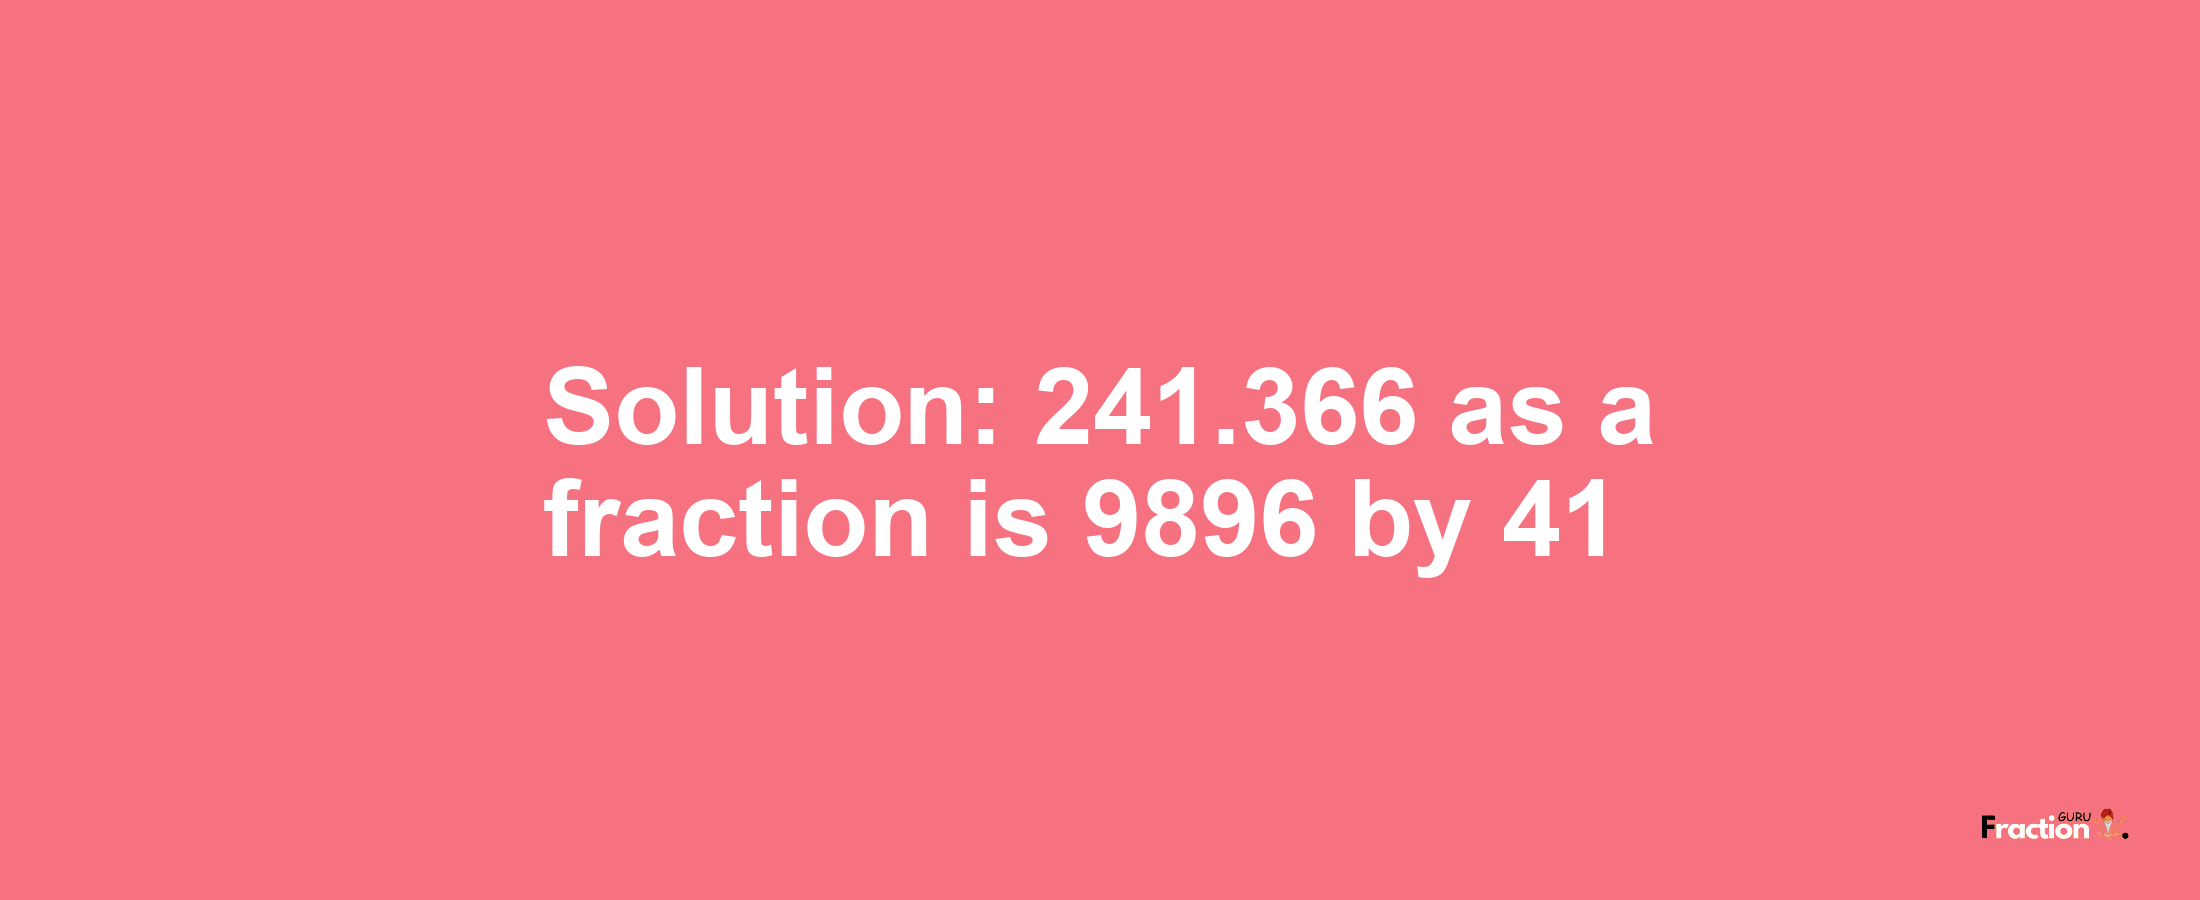 Solution:241.366 as a fraction is 9896/41